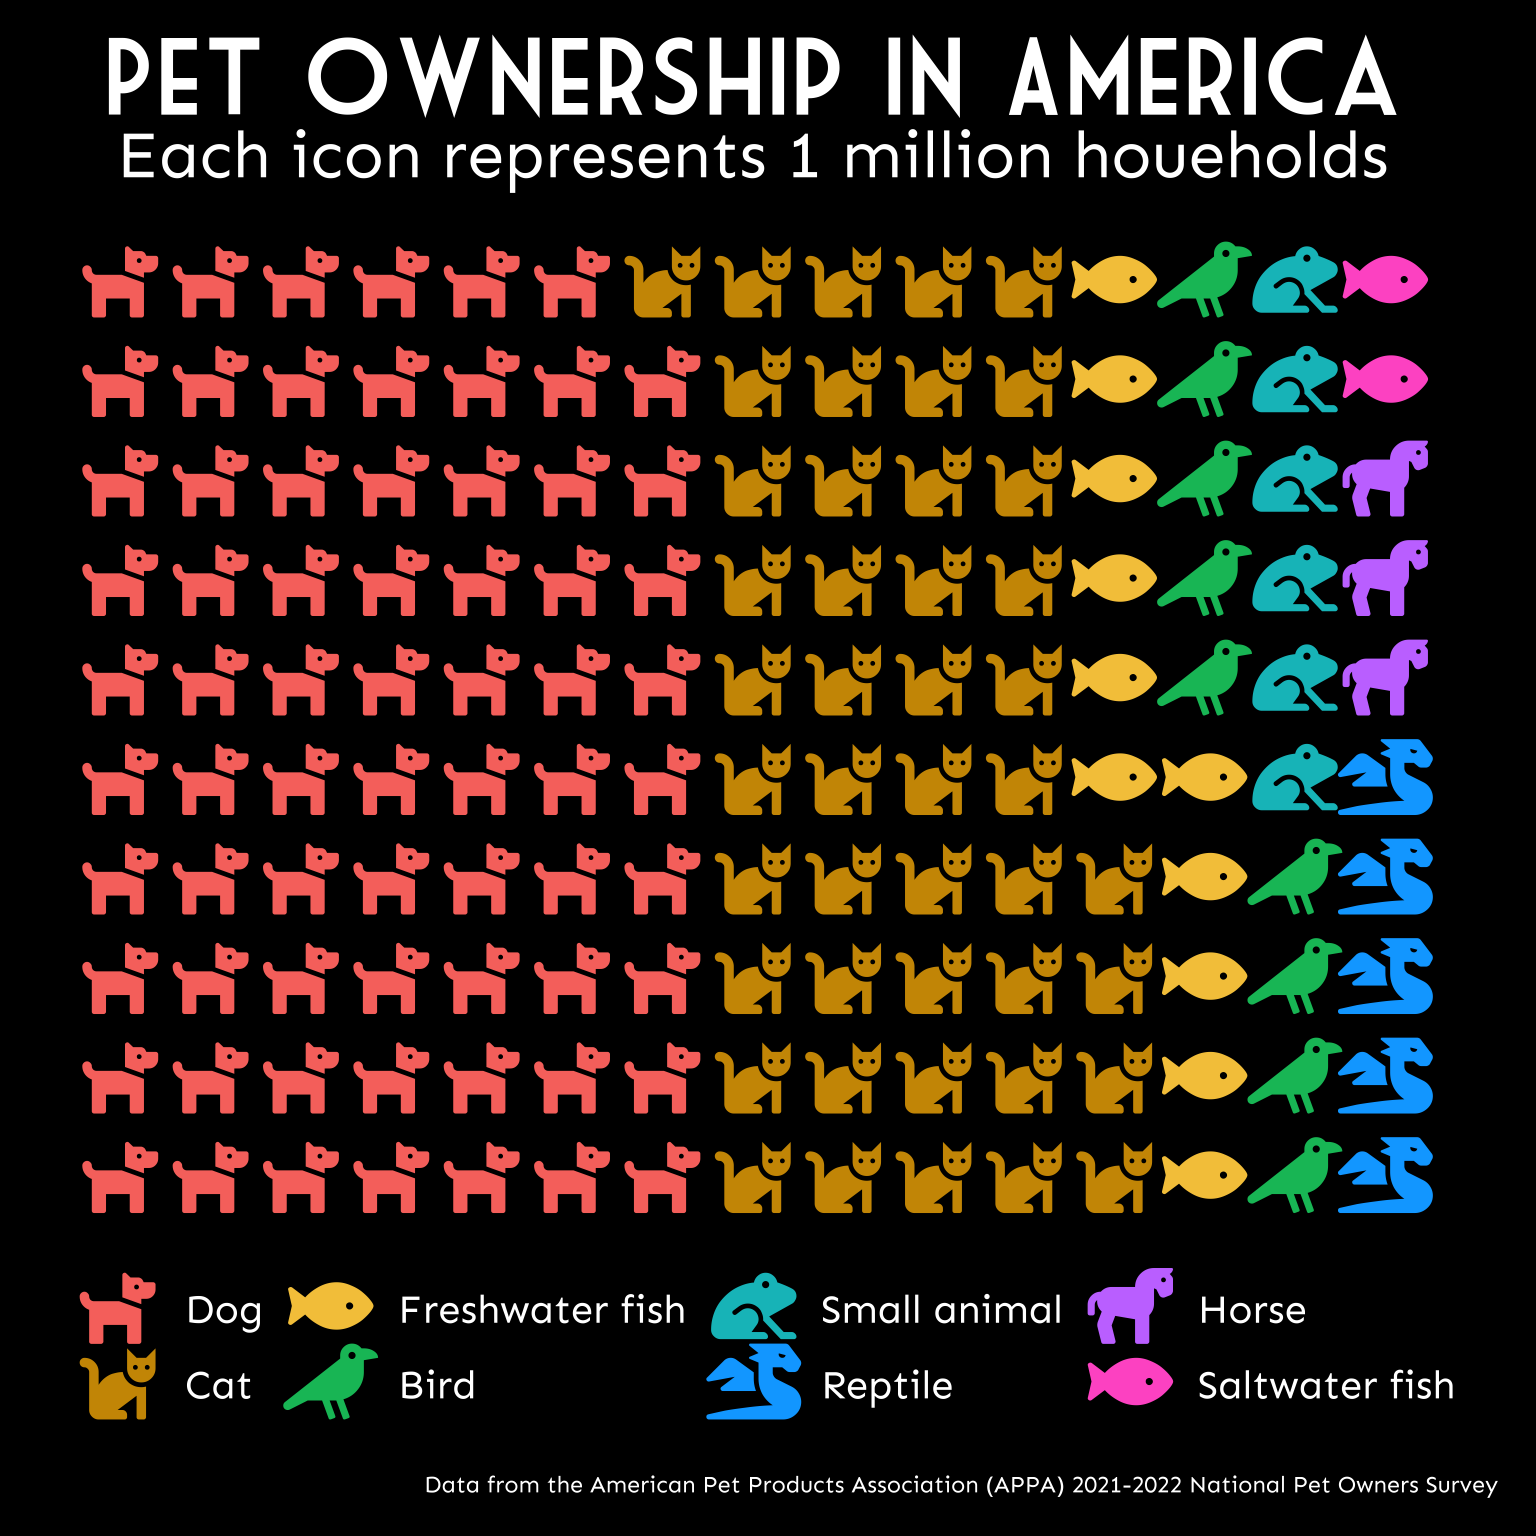 Number of US households (in millions) with each of 8 common pet types.  Data from the American Pet Products Association (APPA) 2021-2022 National Pet Owners Survey. Dog=69, Cat=45.3, Freshwater fish=11.8, Bird=9.9, Small animal=6.2, Reptile=5.7, Horse=3.5, Saltwater fish=2.9